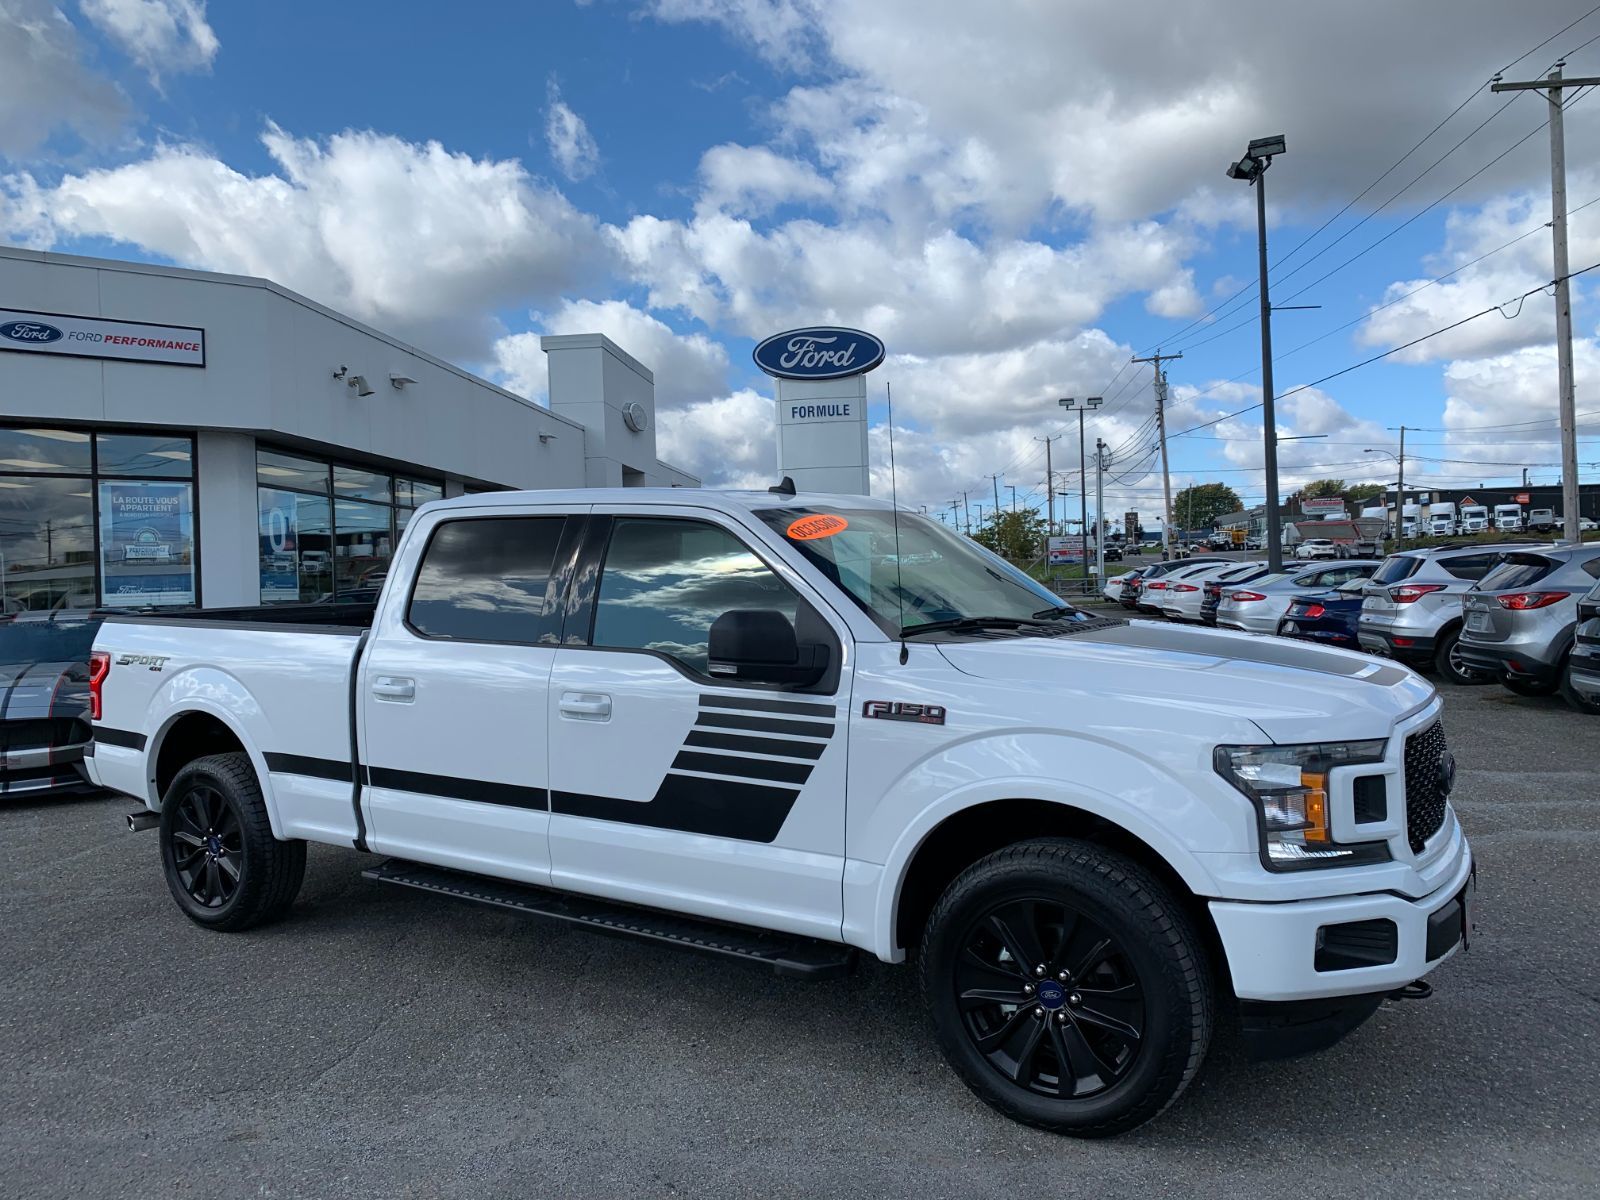 Used 2019 Ford F 150 Super Crew Sport 302a In Granby Used Inventory Formule Ford In Granby Quebec